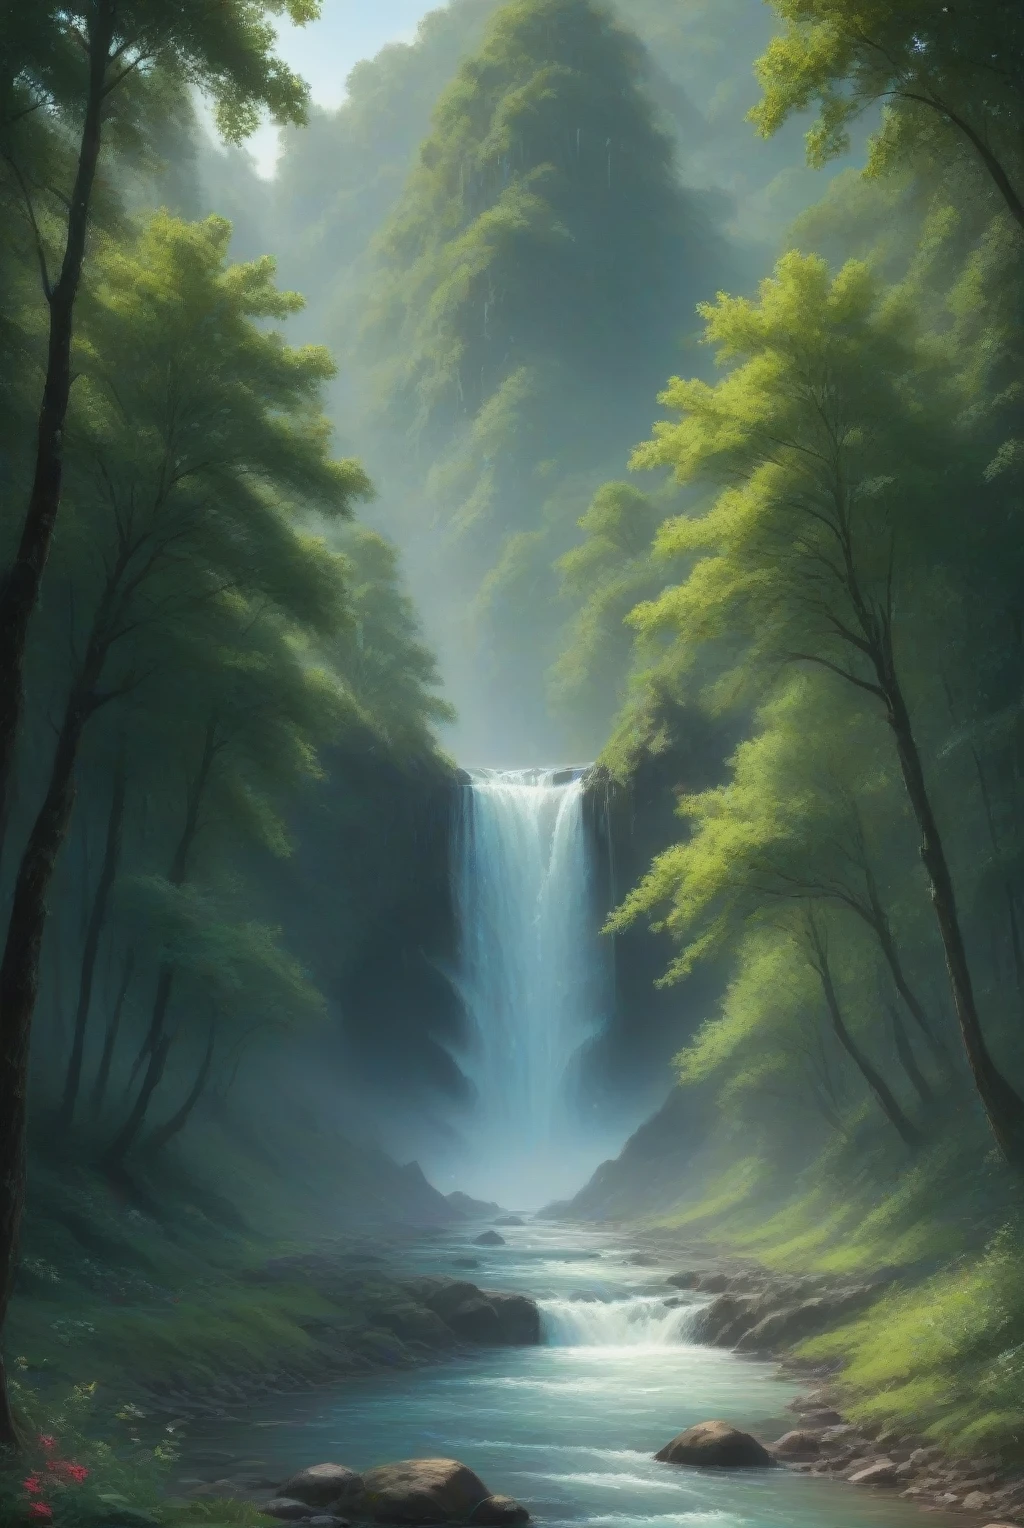 Generate a natural image depicting a tranquil place with many trees. The area is separated by a large waterfall flowing down into a river. Ensure the sunlight shines brightly on the top of the waterfall, creating a sparkling effect. Natural colors should be present and detailed to make the image look like a paradise. The trees should be vast and green, with some flowering trees, and the river should reflect the sunlight. Aim for an atmosphere of tranquility and natural beauty.